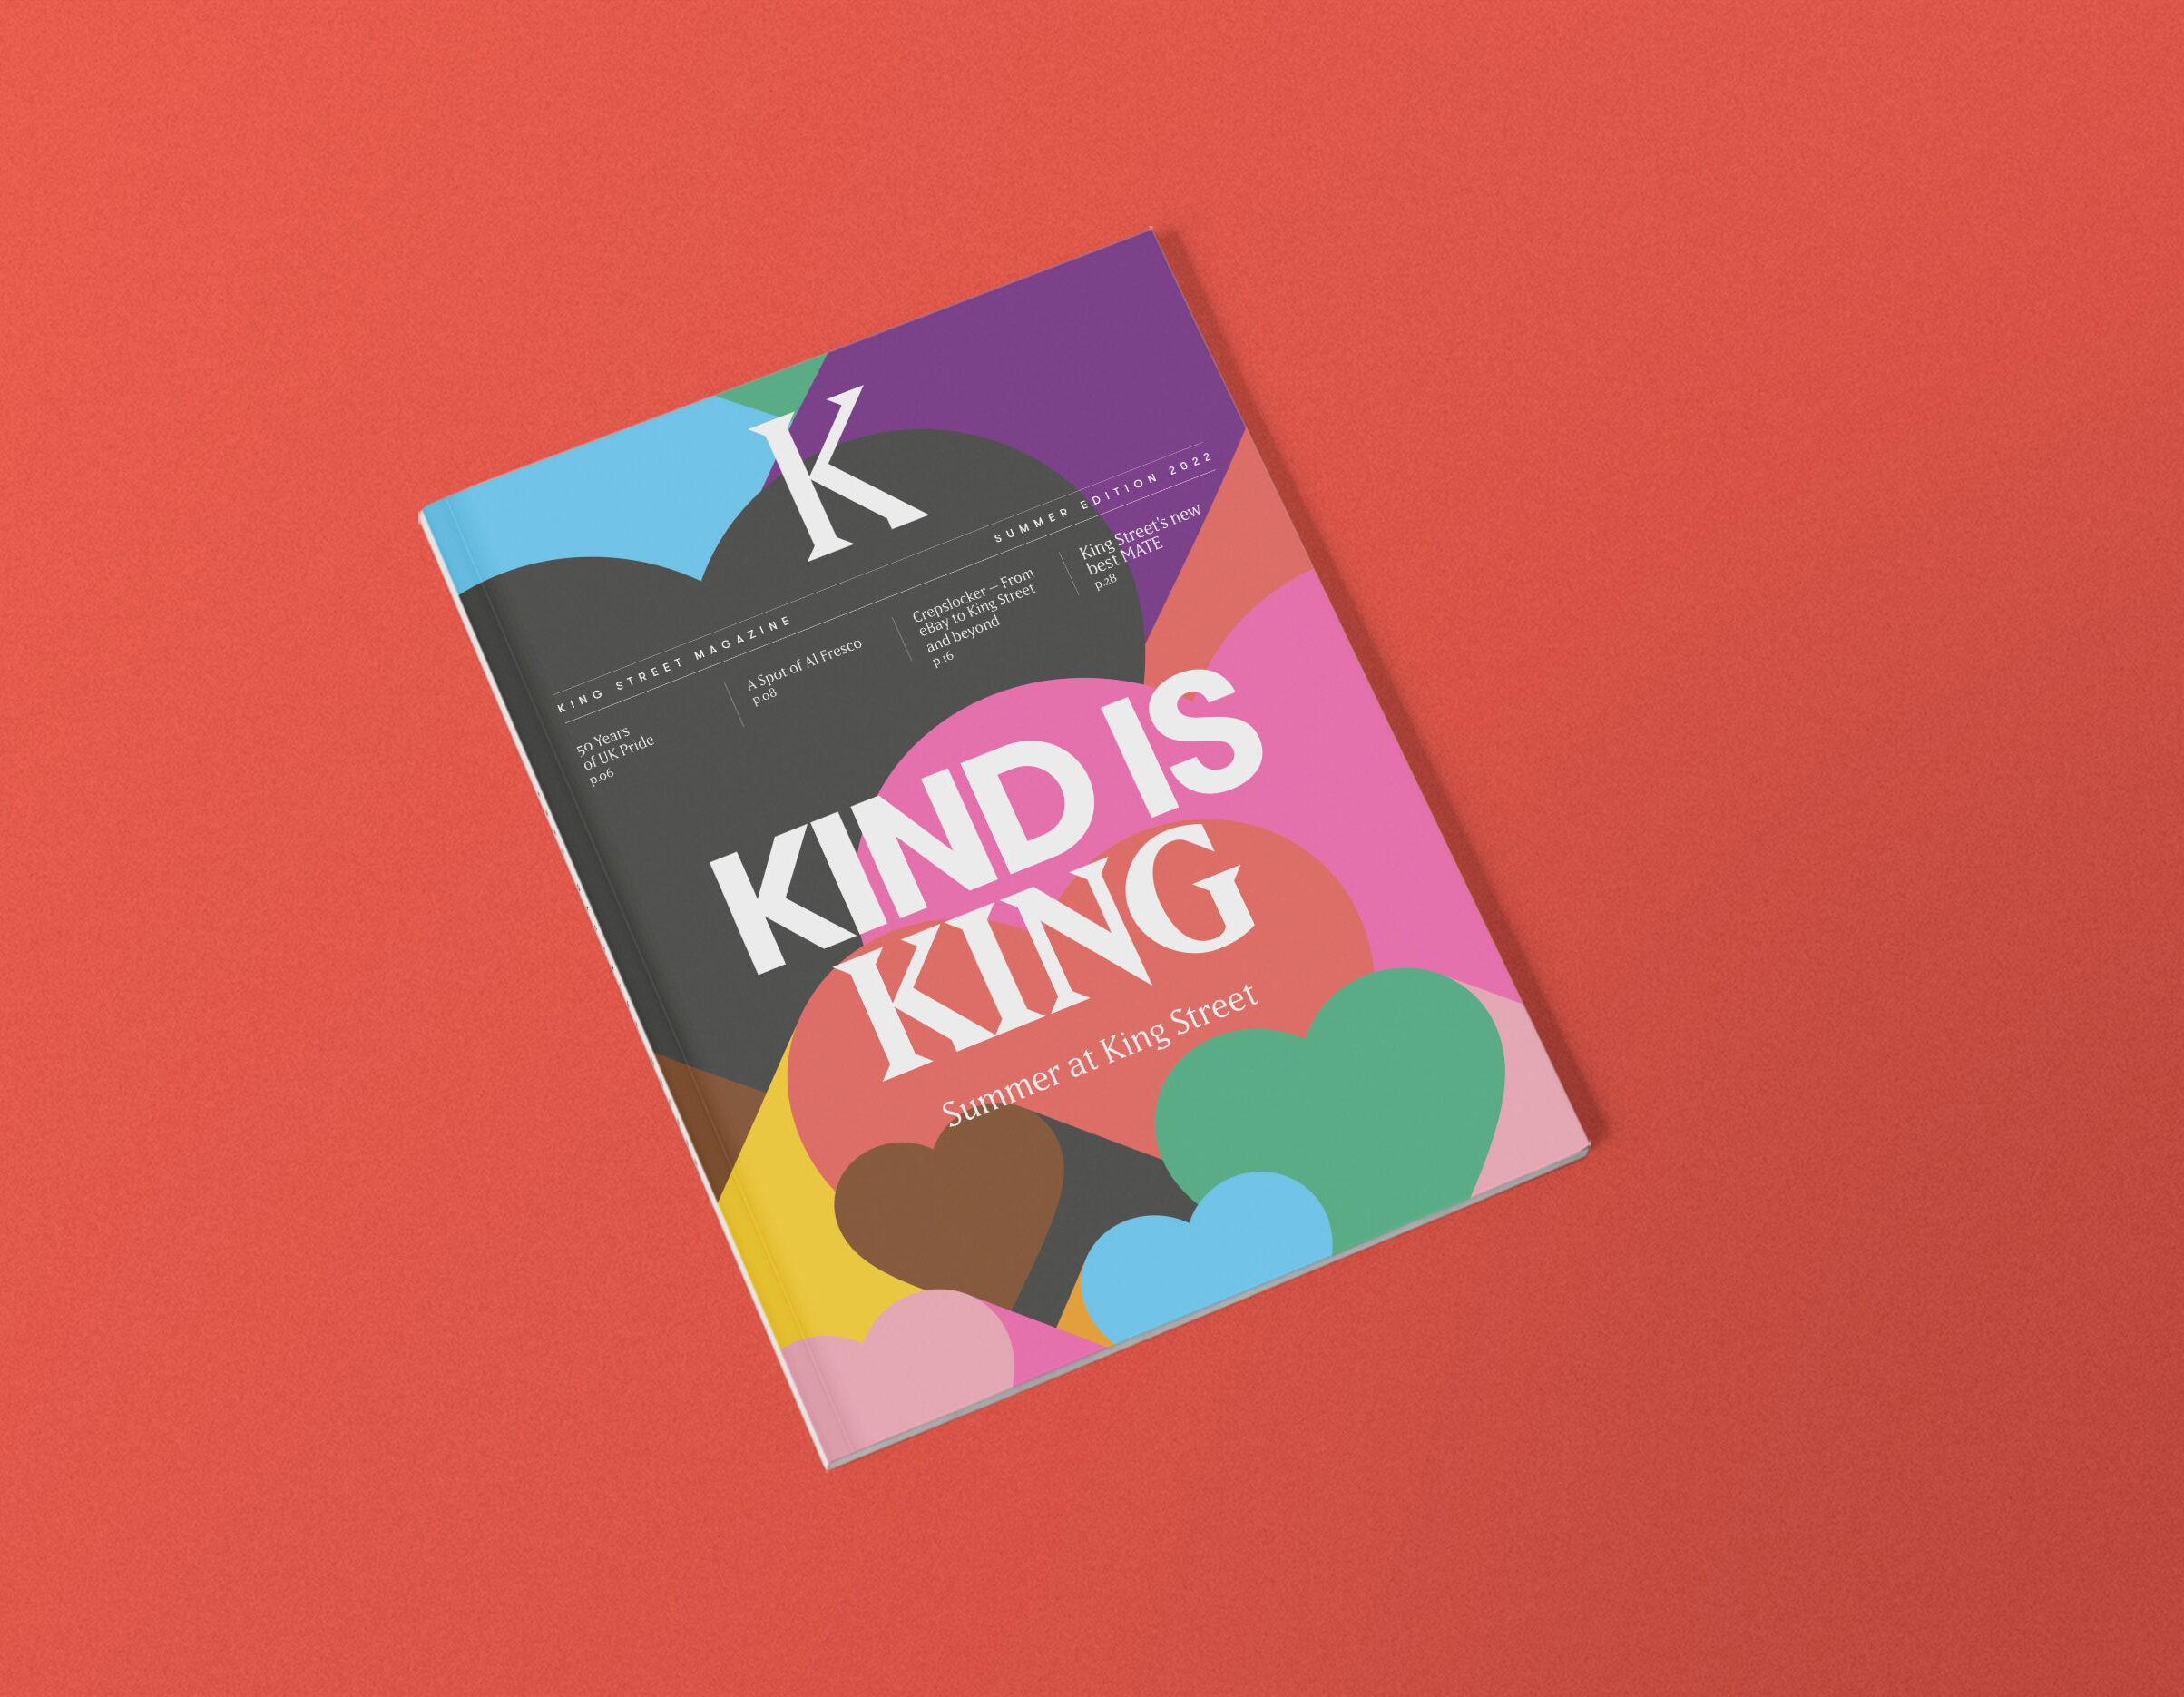 Kind is King with the new King Street Magazine